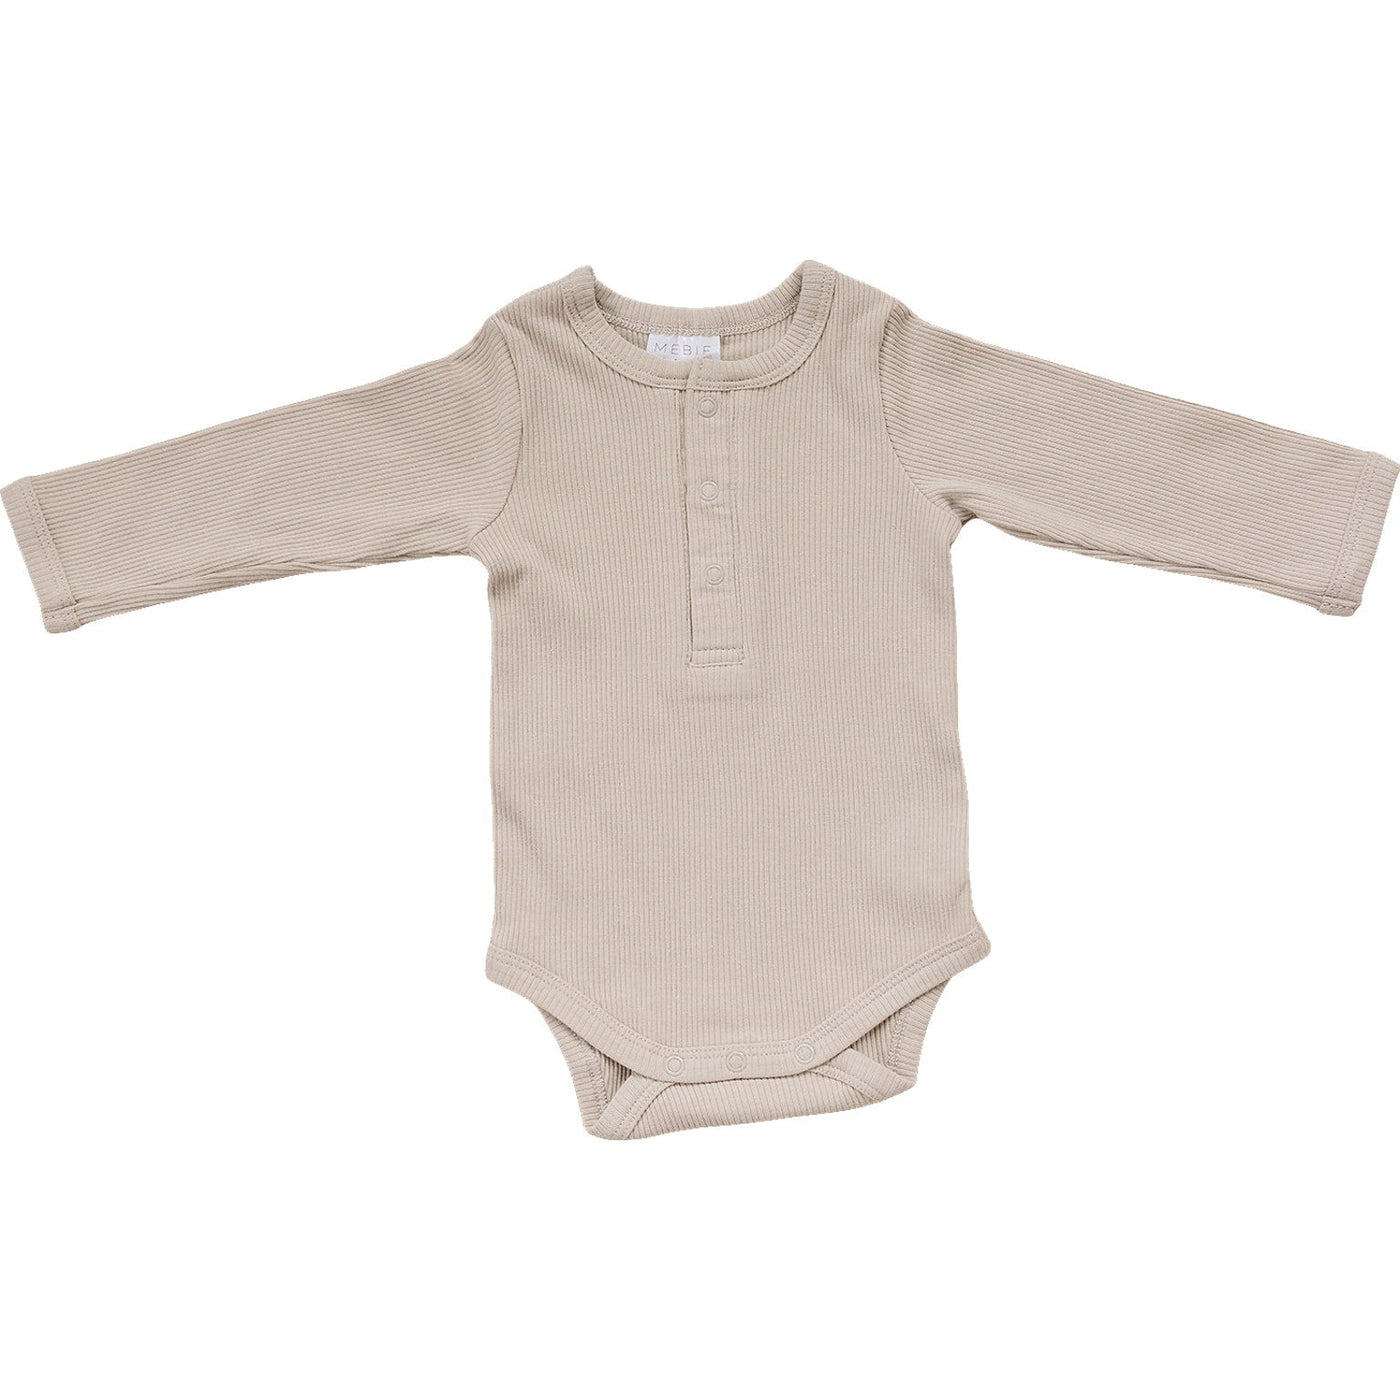 a baby bodysuit with long sleeves